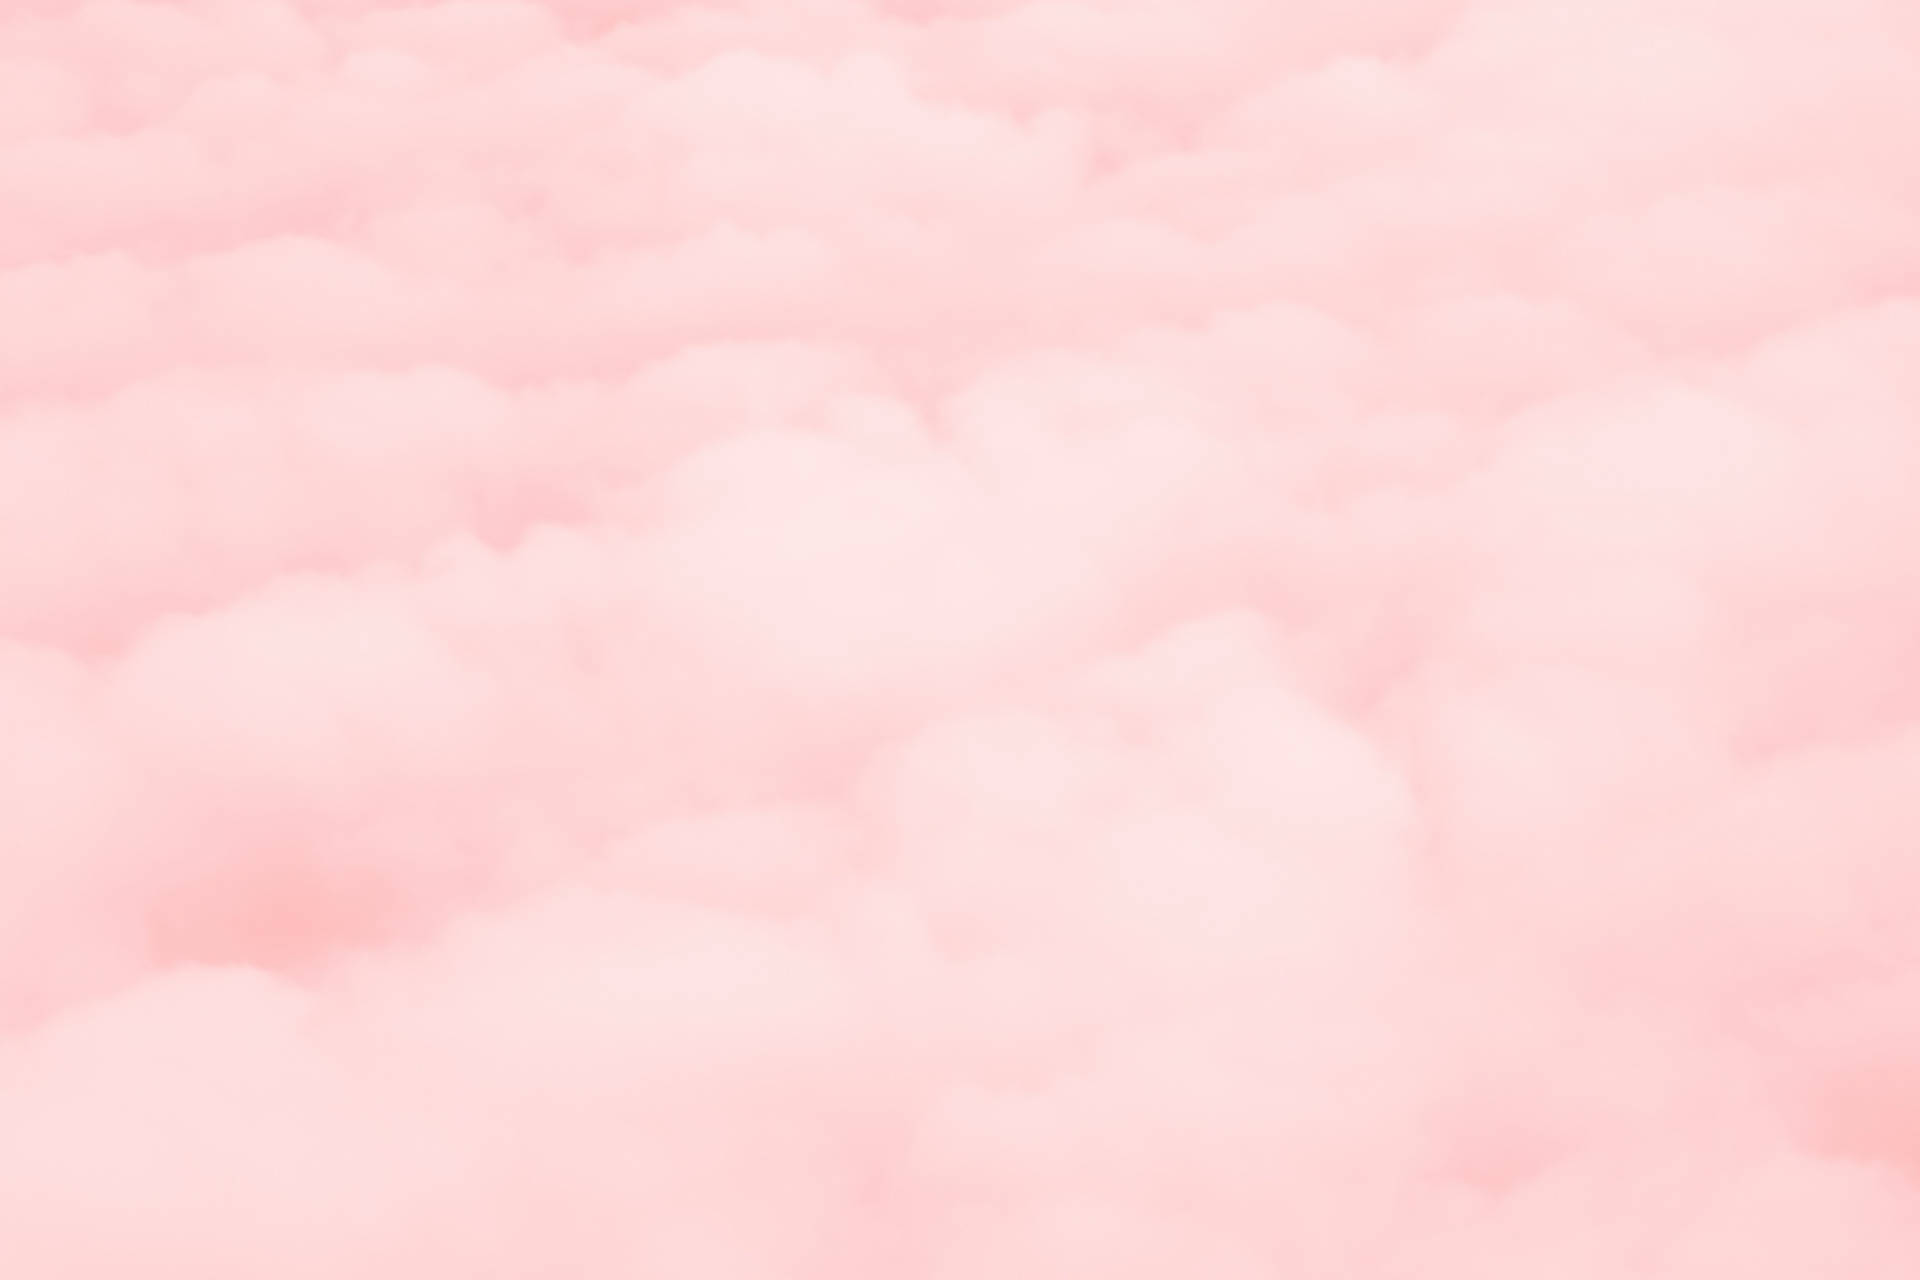 Cute Pastel Aesthetic Pink Cotton Clouds